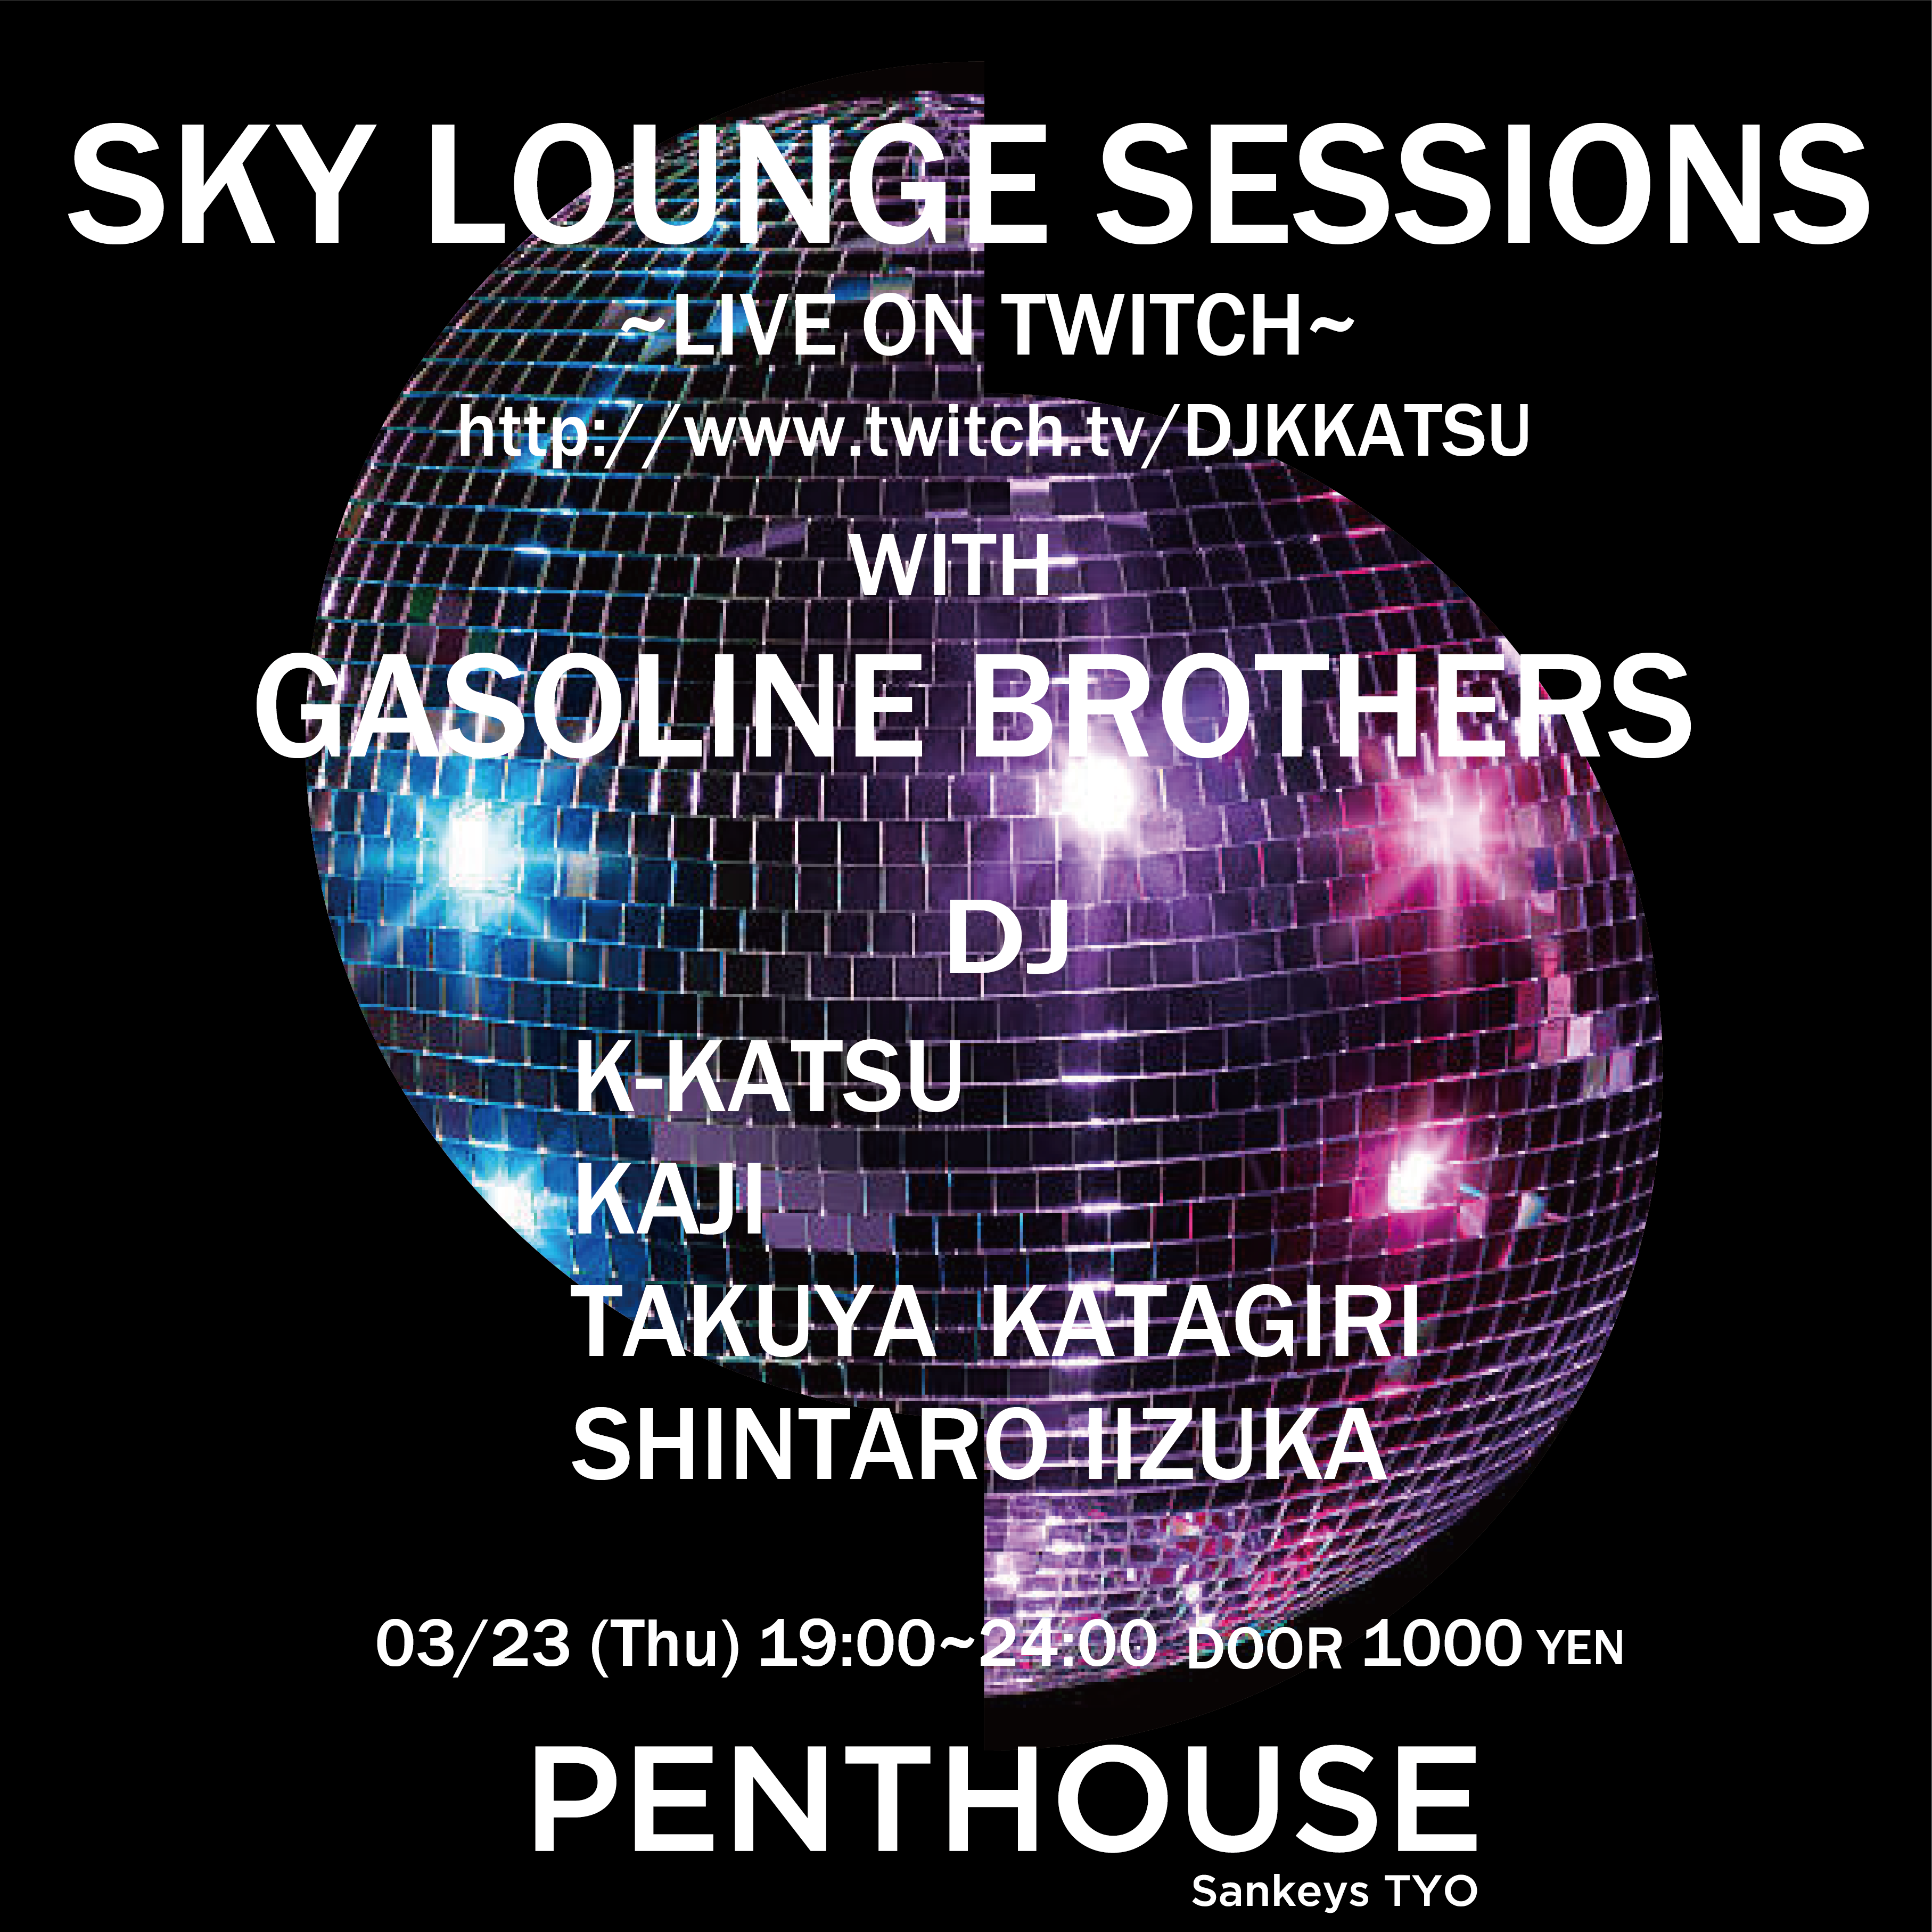 SKY LOUNGE SESSION WITH GASOLINE BROTHERS